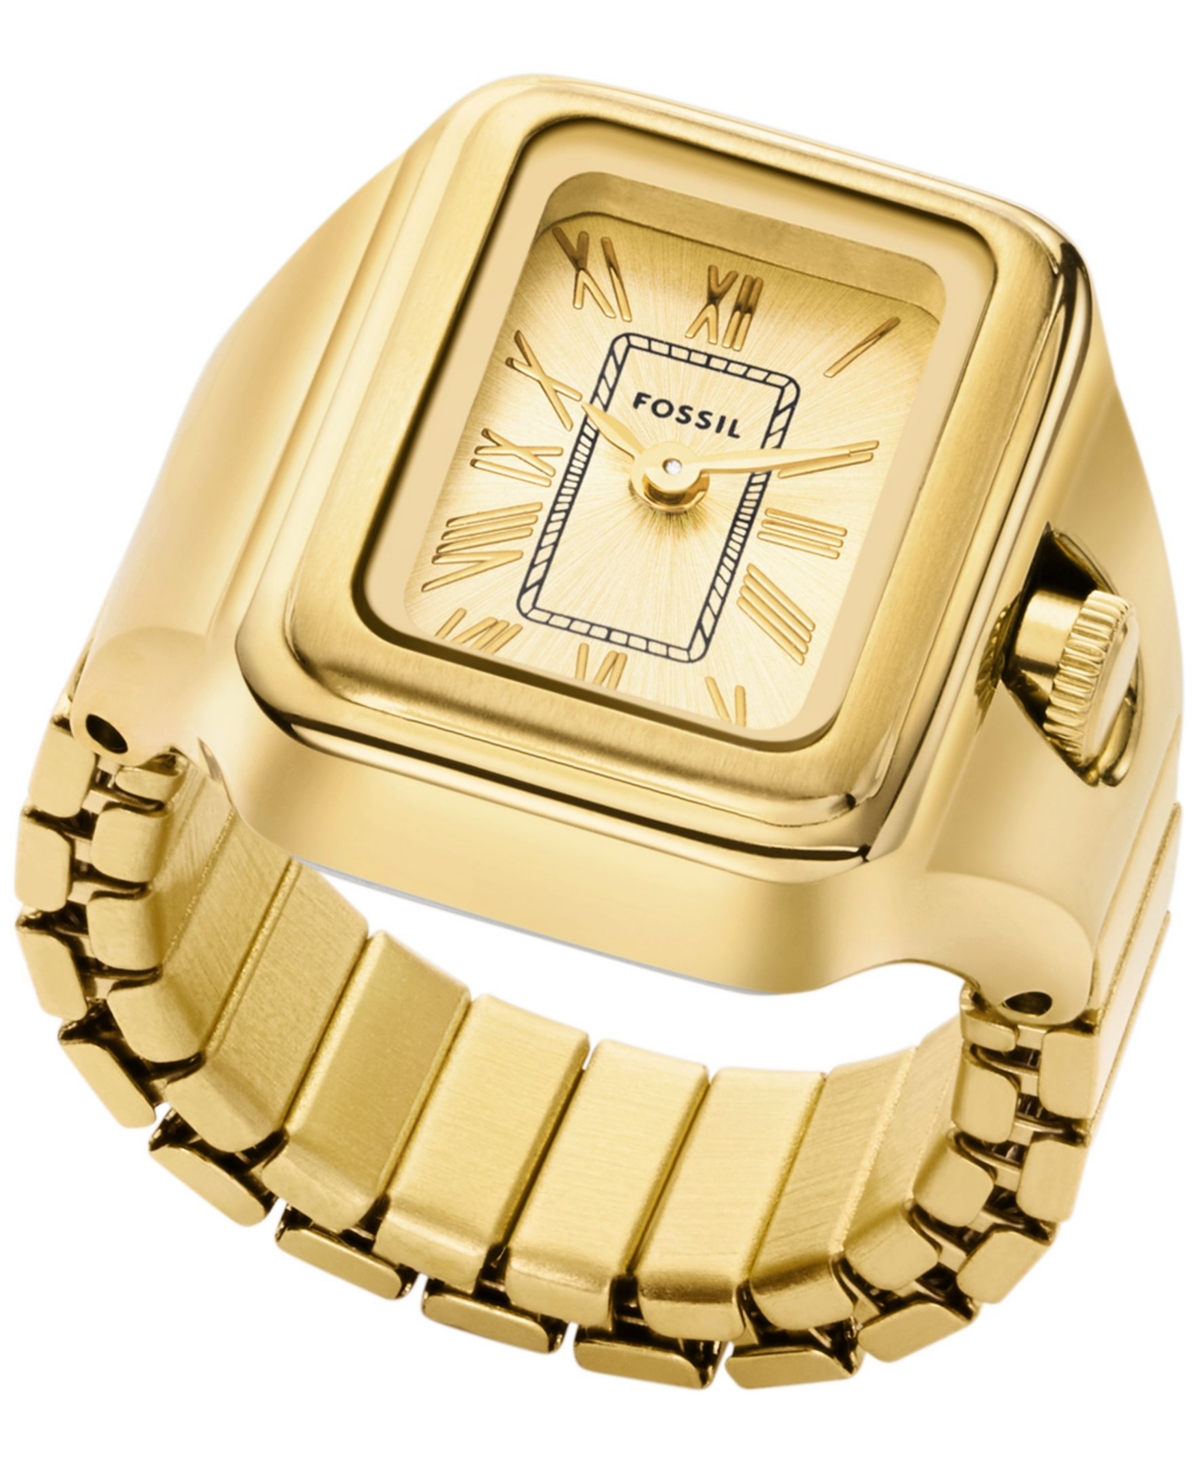 Fossil Women's Raquel Two-hand Gold-tone Stainless Steel Ring Watch 14mm